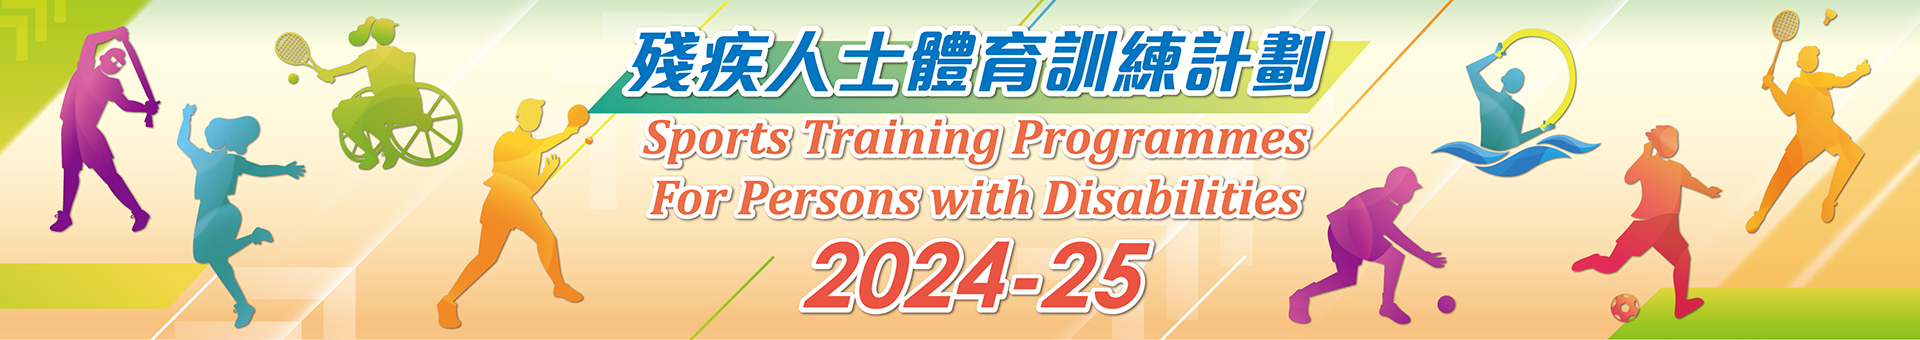 Sports Training Programmes for Persons with Disabilities